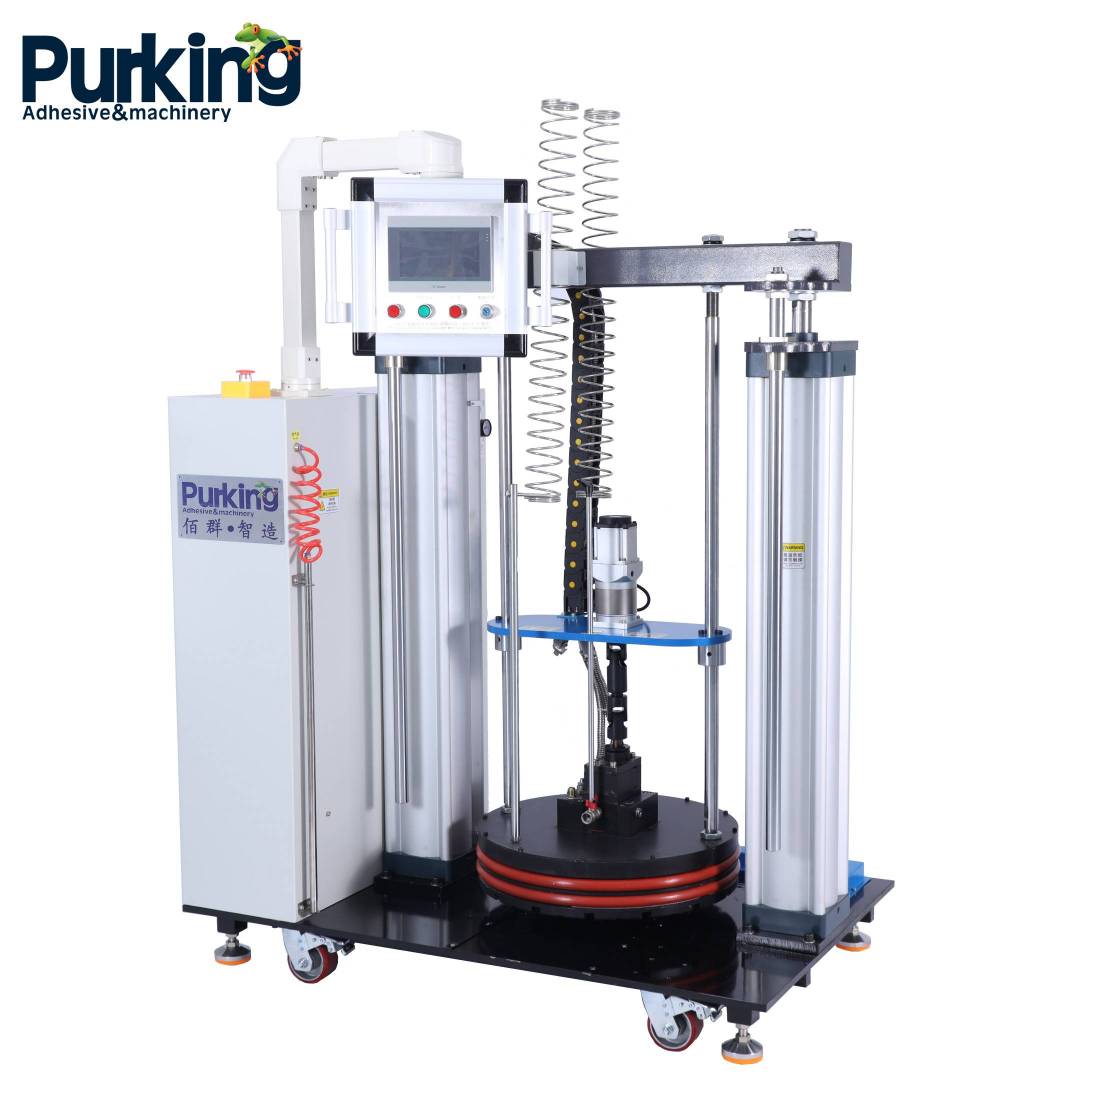 The application fields of Purking hot melt equipment are comprehensive.